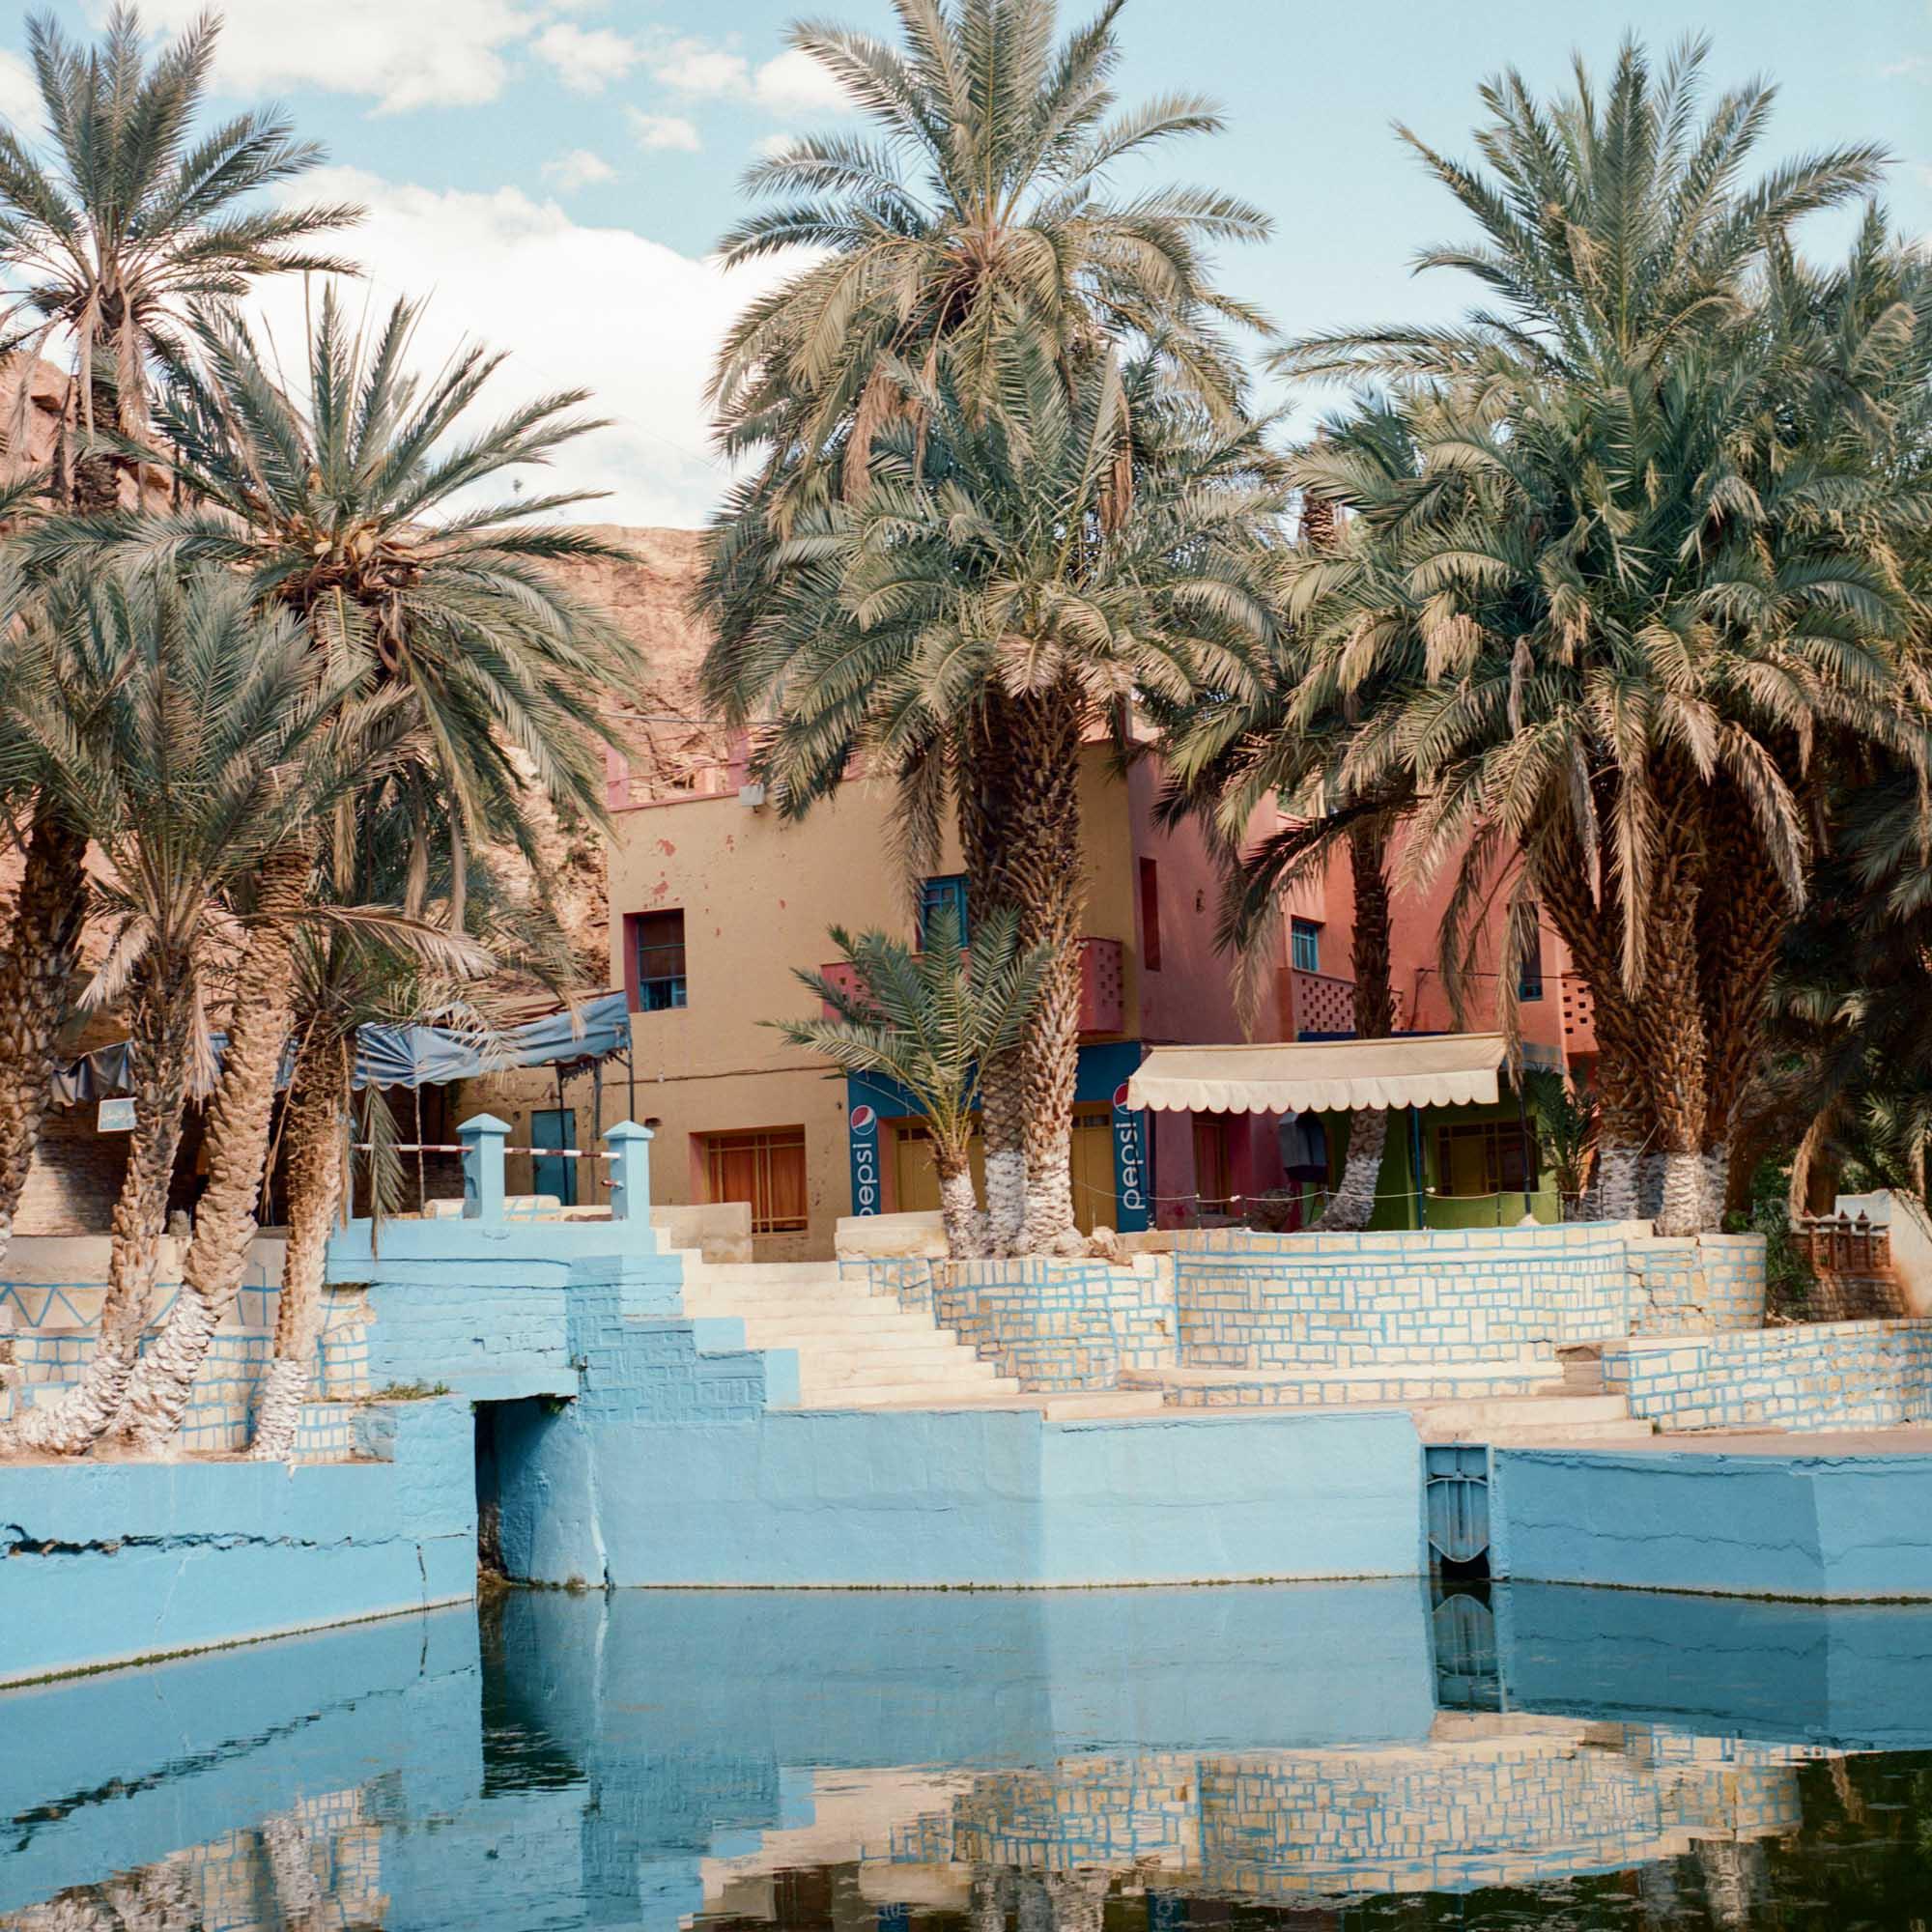 Before it's gone  - Oasis of Meski, Morocco, in April 2022.  